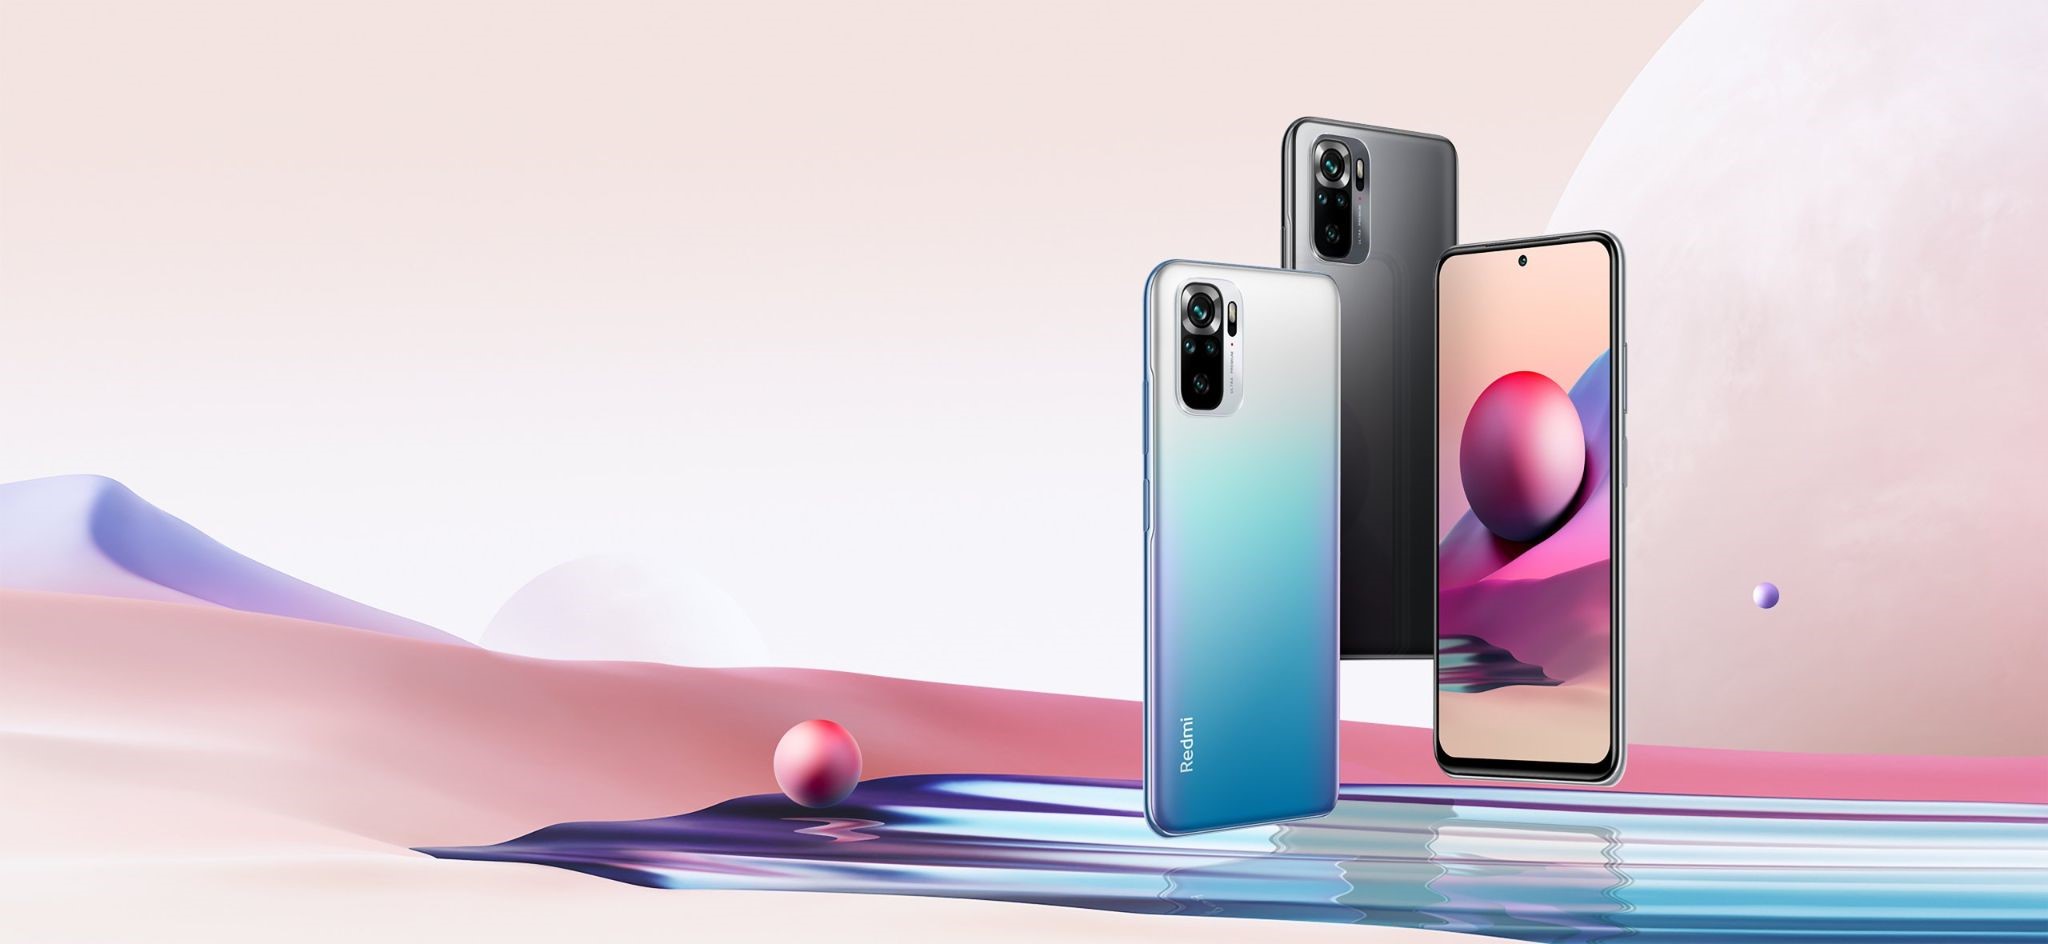 Redmi Note 10s India Launch Date, Price, And Specifications.